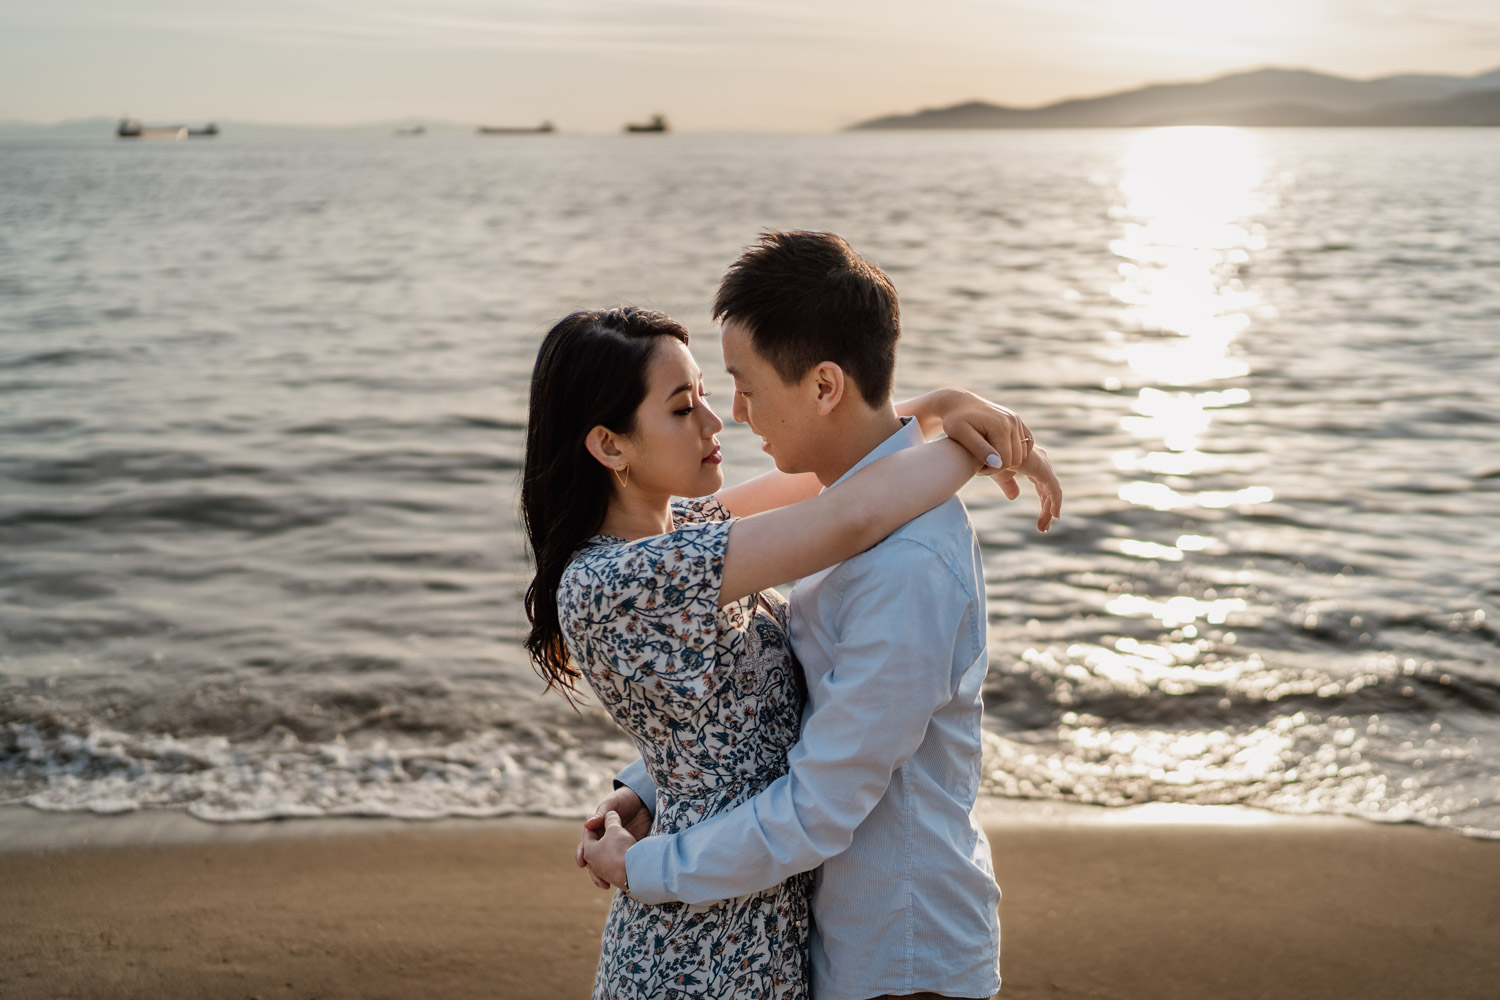 stanley park engagement photography in vancouver bc during sunset or golden hour at third beach